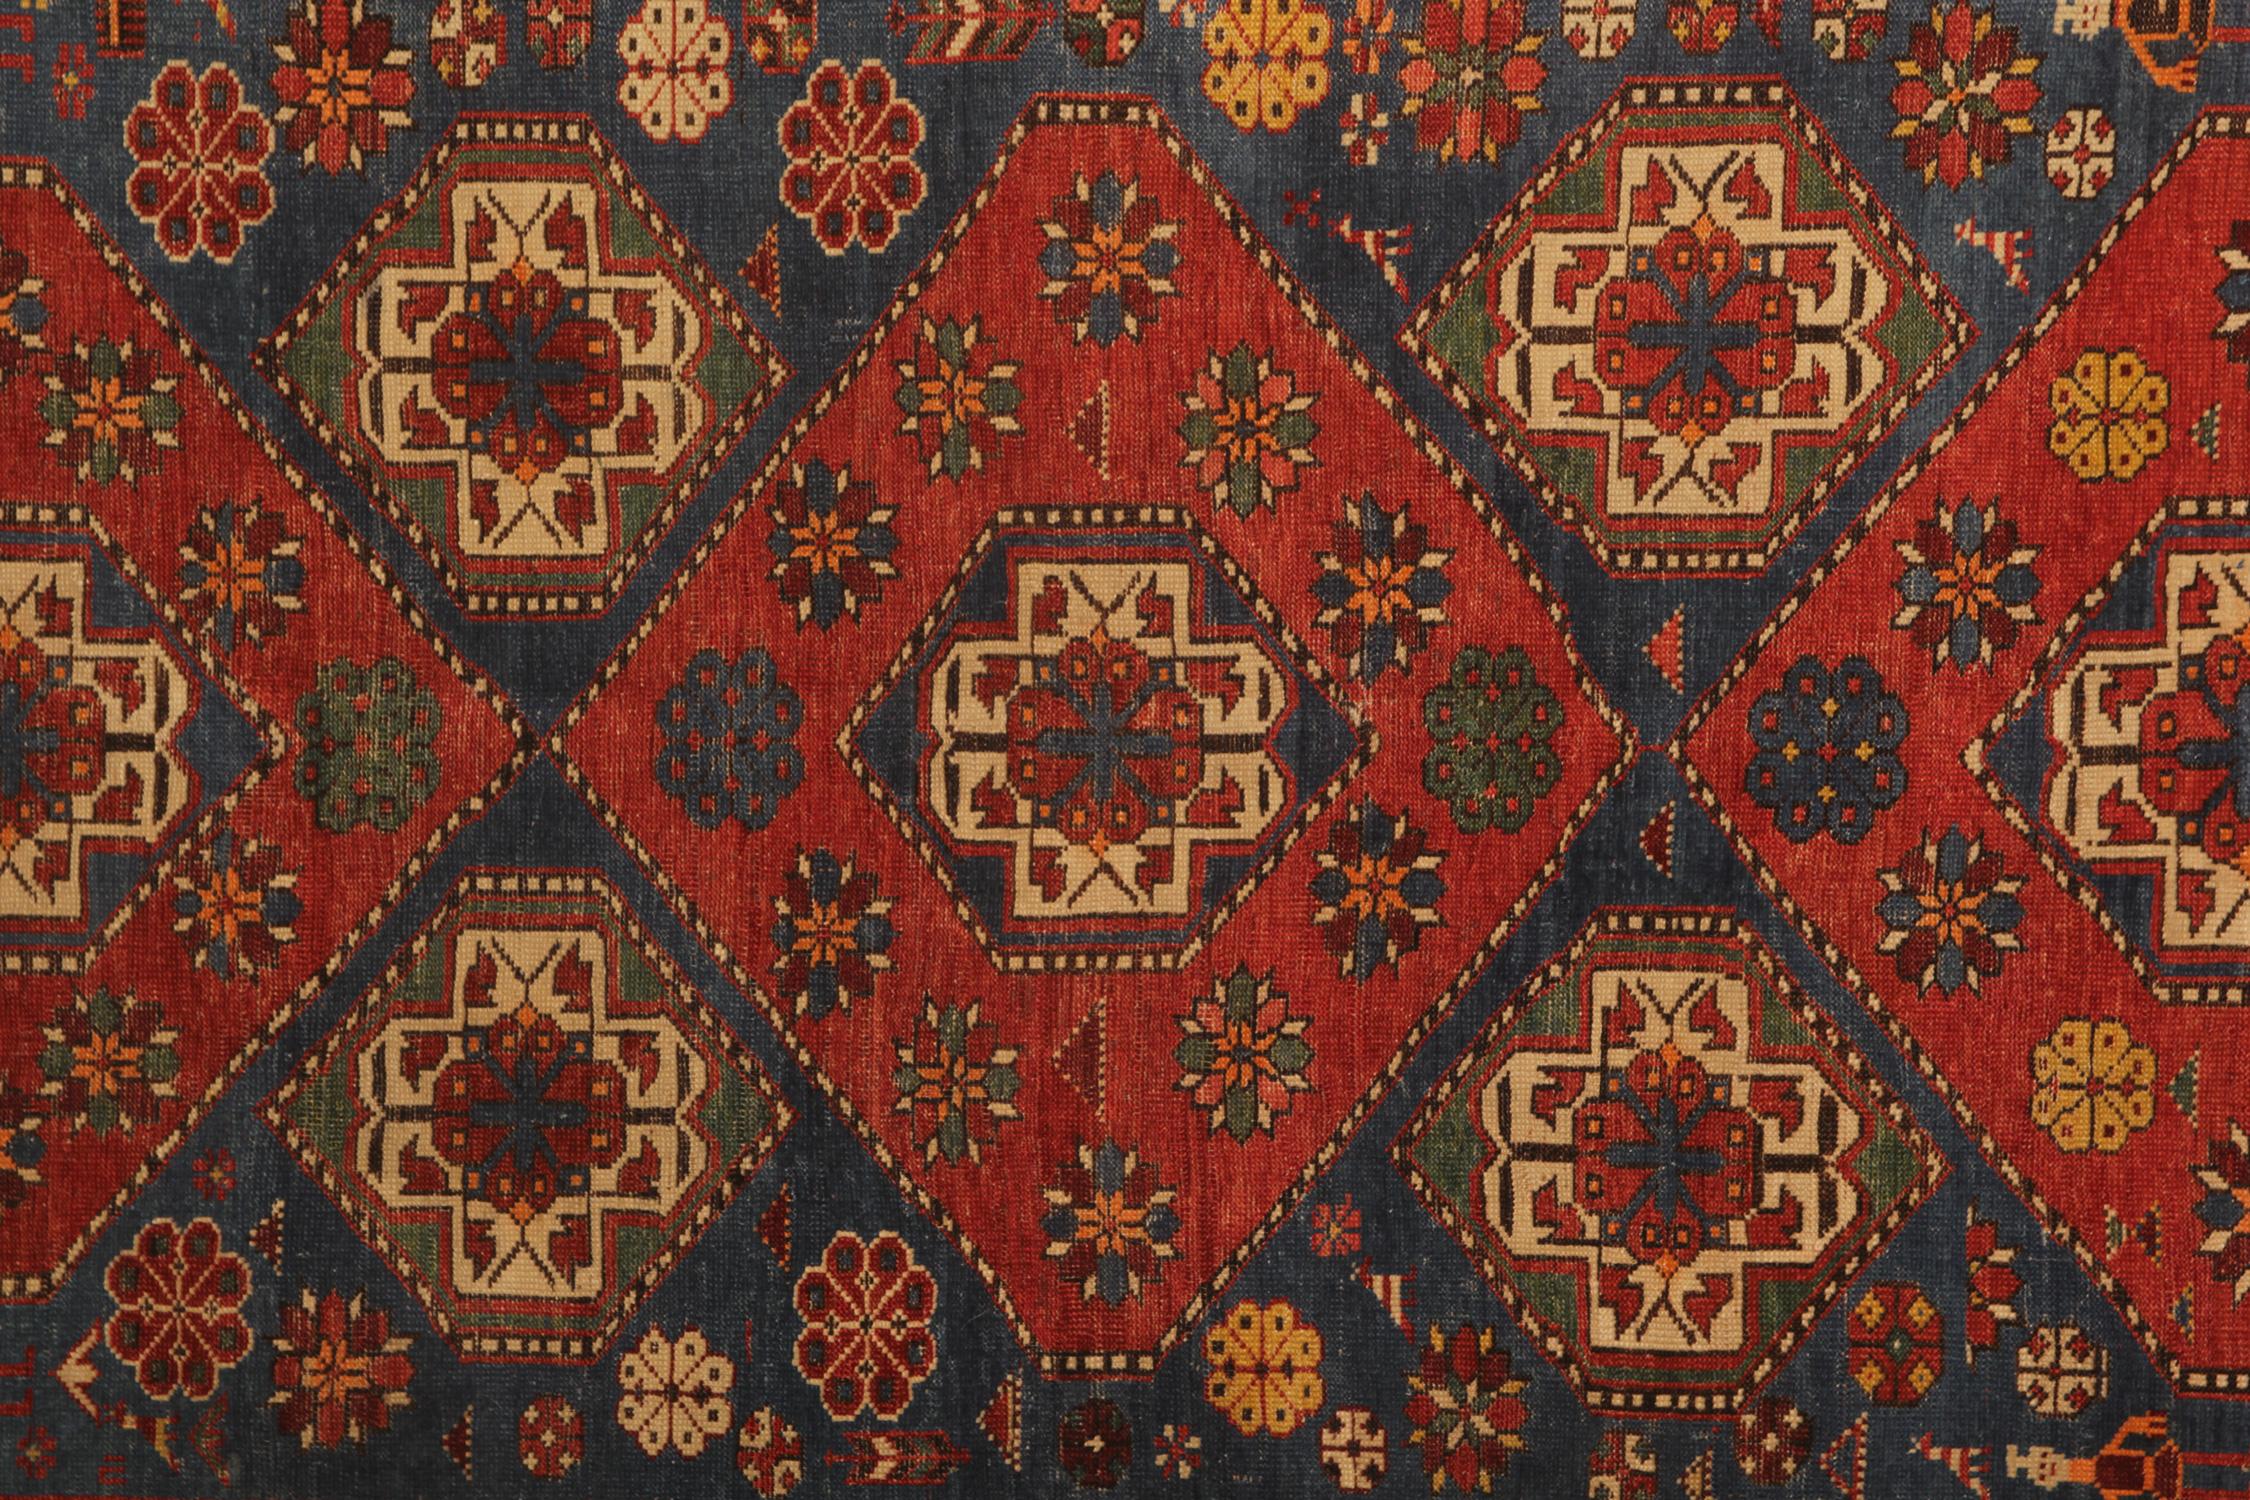 An excellent example of traditional Caucasian carpet rug weaving from the Shirvan region. These Medallion ground design patterned rugs can be the best element of home decor objects to give warmth to the environment, because this woven rug has a